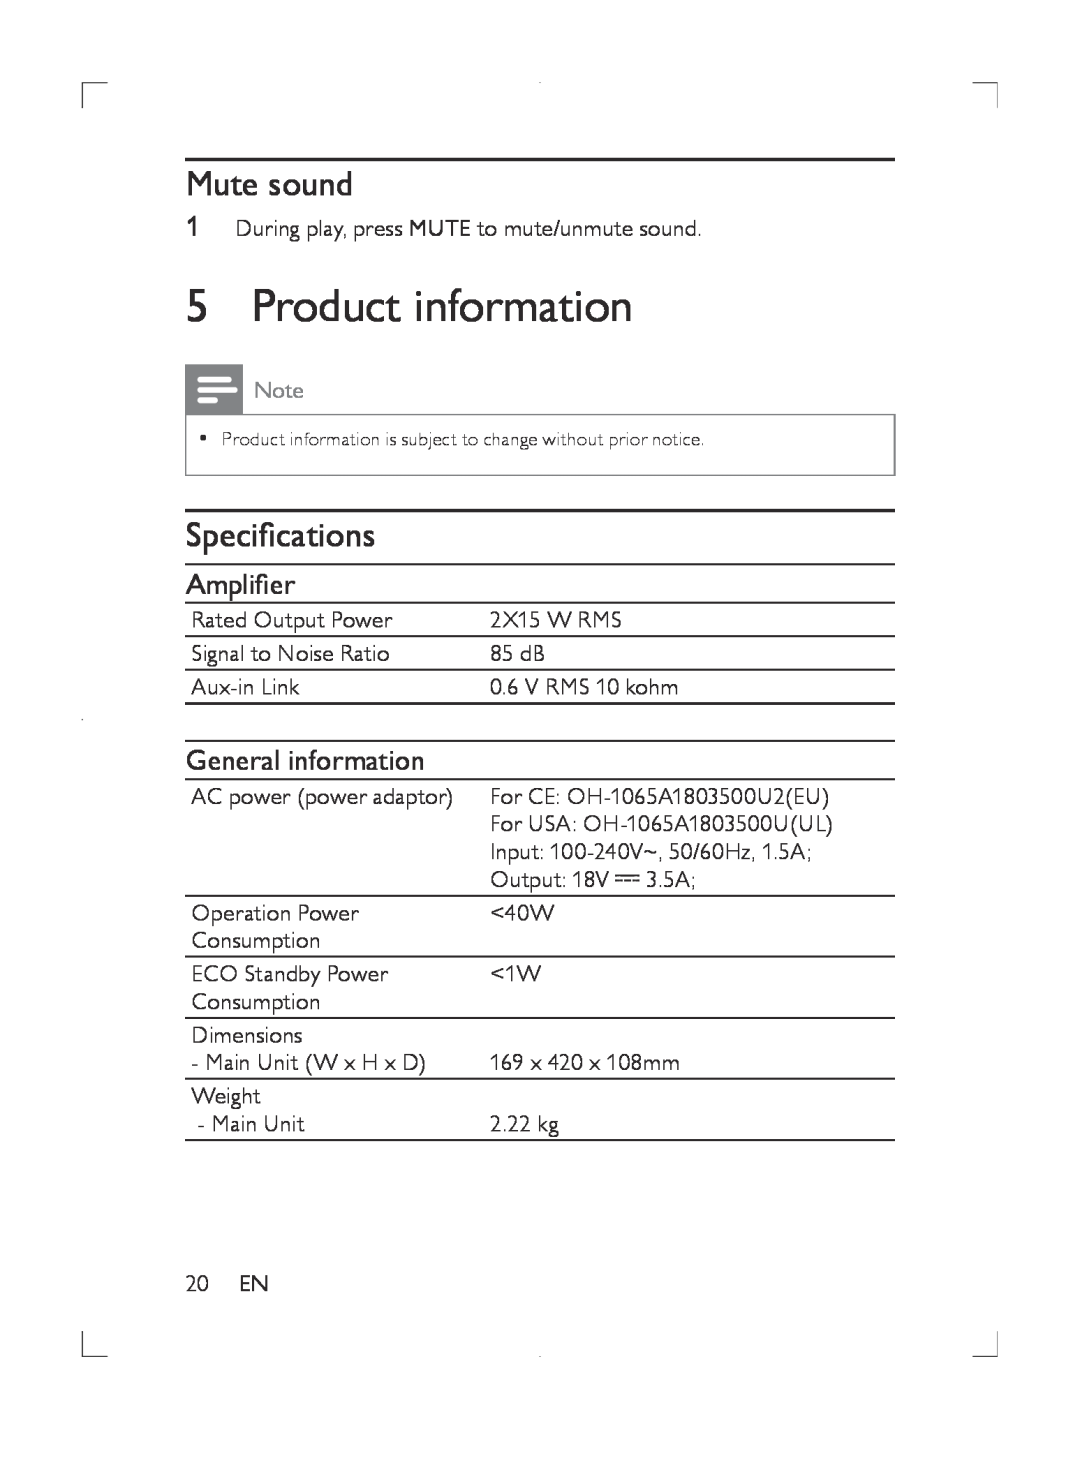 Philips DS8550 user manual Product information, Mute sound, Specifications, Amplifier, General information 